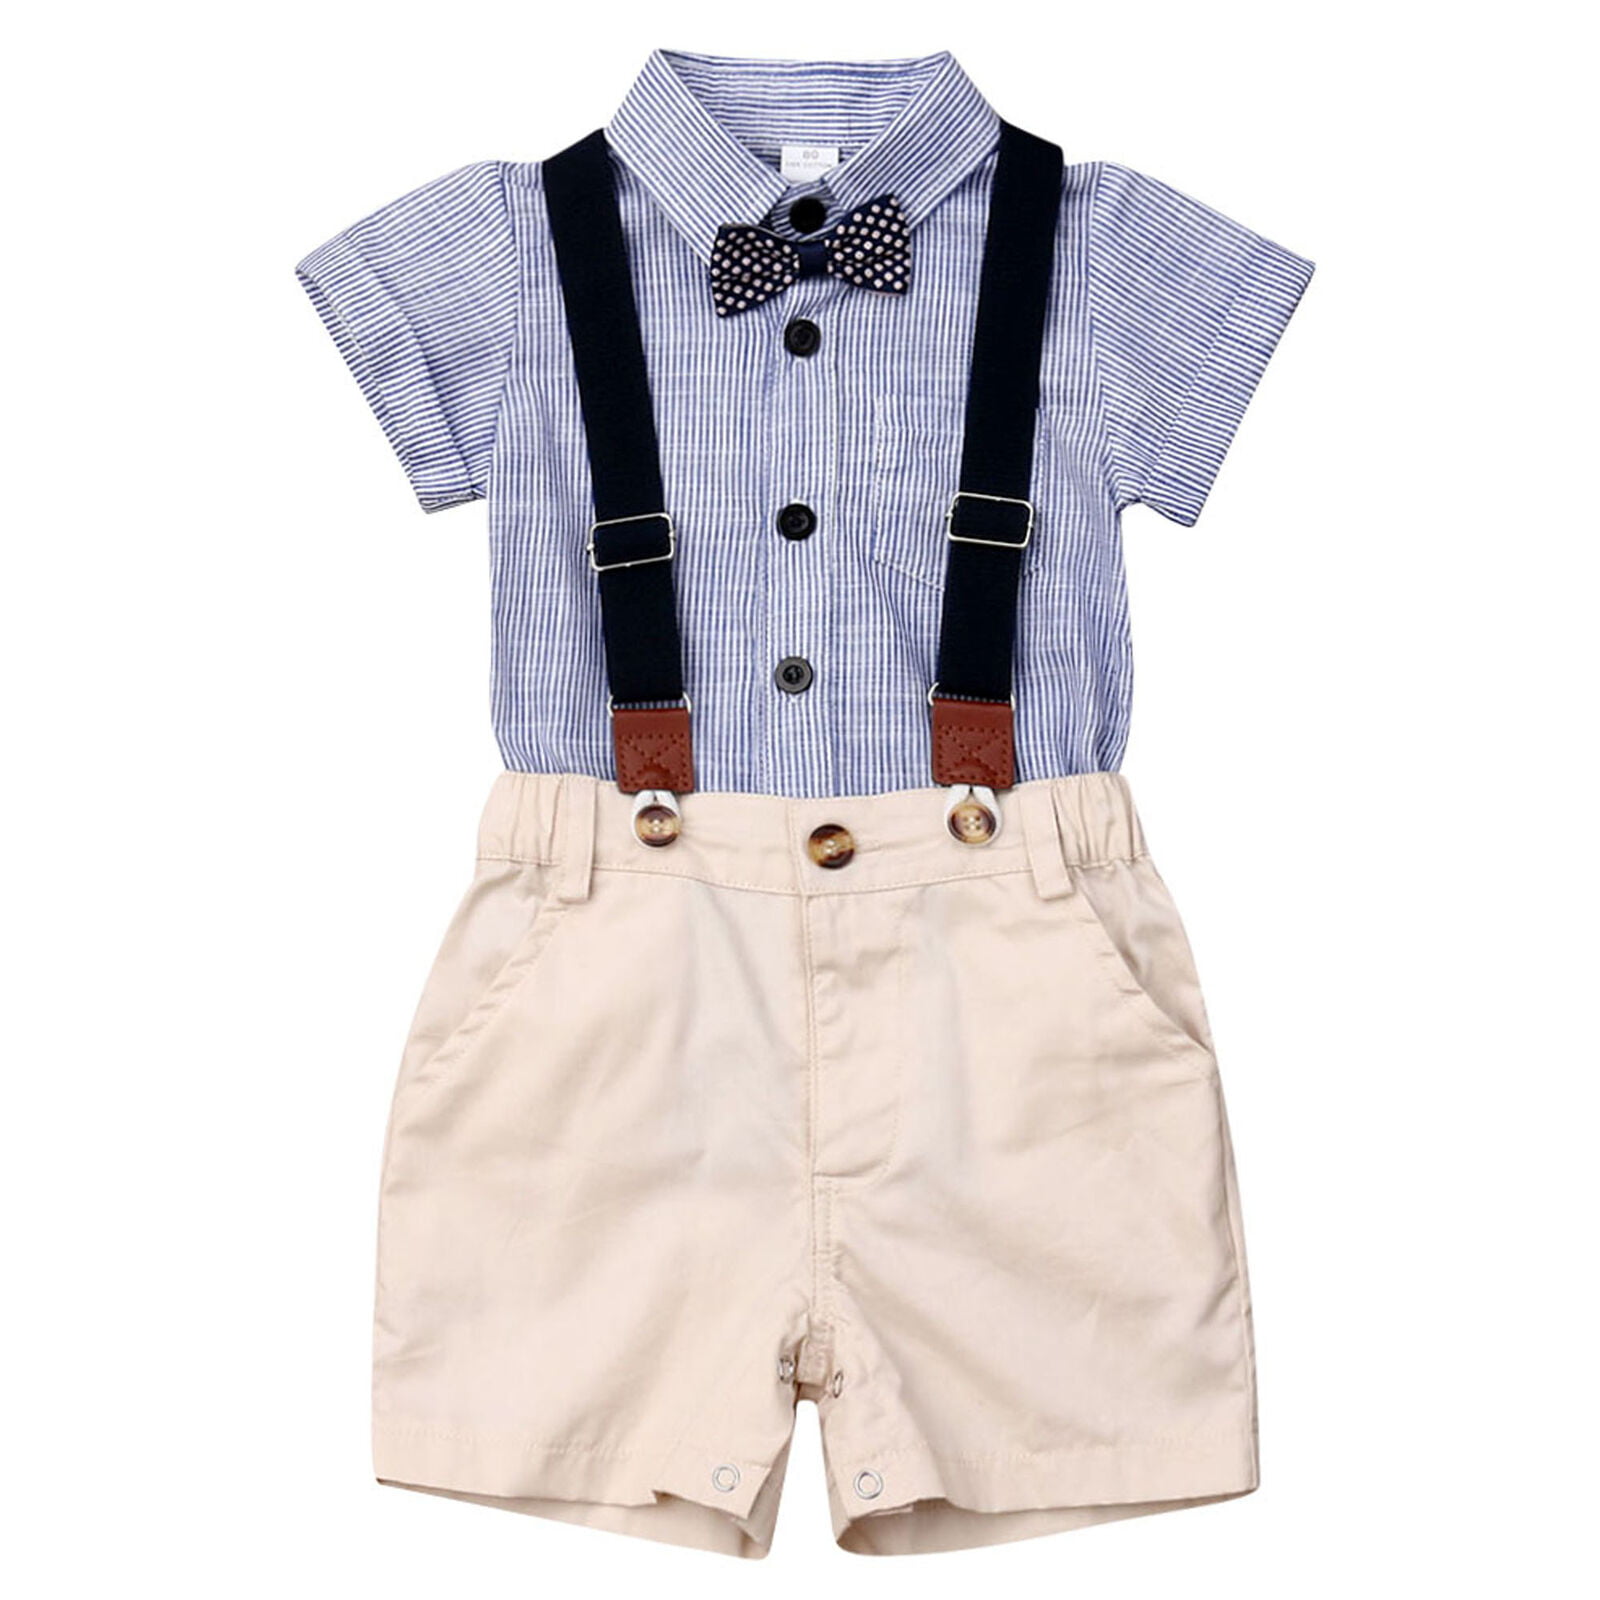 Baby Boys Clothes Set Toddler Kid Newborn Cartoon Short Sleeve T-Shirt Tops+Suspenders Rompers Overalls 2Pcs Summer Outfits 